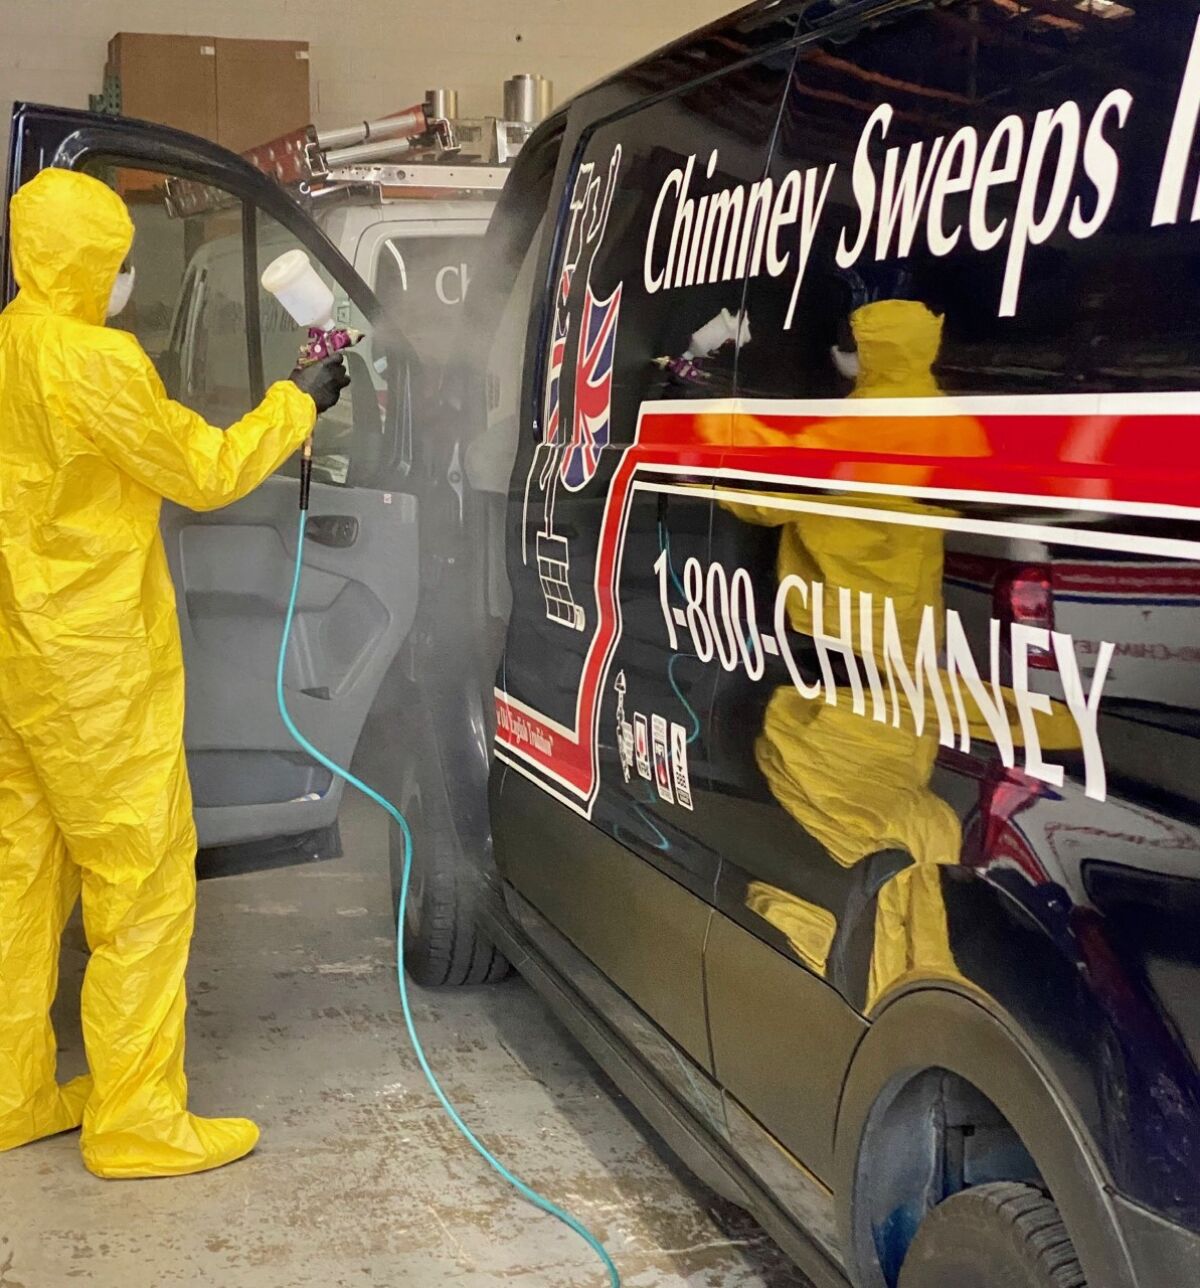 Chimney Sweeps, a family-owned company that began more than 30 years ago, is taking precautions to protect its employees and customers. Chimney Sweeps services all areas of San Diego County. For more information, call (619) 593-4020 and visit chimneysweepsinc.com